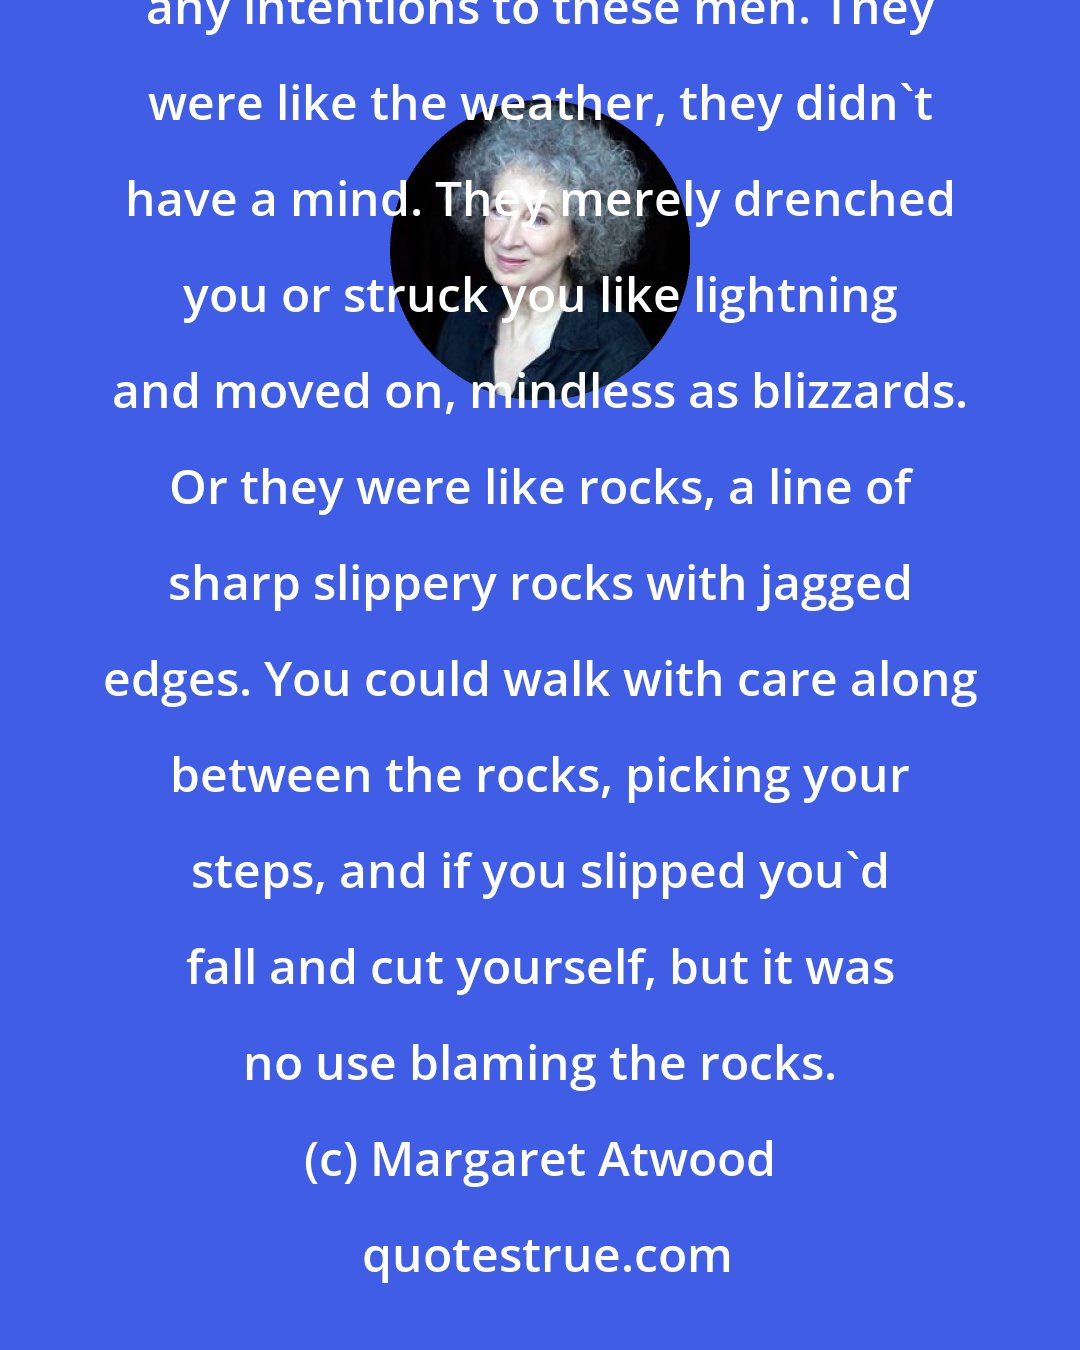 Margaret Atwood: There were no men in this painting, but it was about men, the kind who caused women to fall. I did not ascribe any intentions to these men. They were like the weather, they didn't have a mind. They merely drenched you or struck you like lightning and moved on, mindless as blizzards. Or they were like rocks, a line of sharp slippery rocks with jagged edges. You could walk with care along between the rocks, picking your steps, and if you slipped you'd fall and cut yourself, but it was no use blaming the rocks.